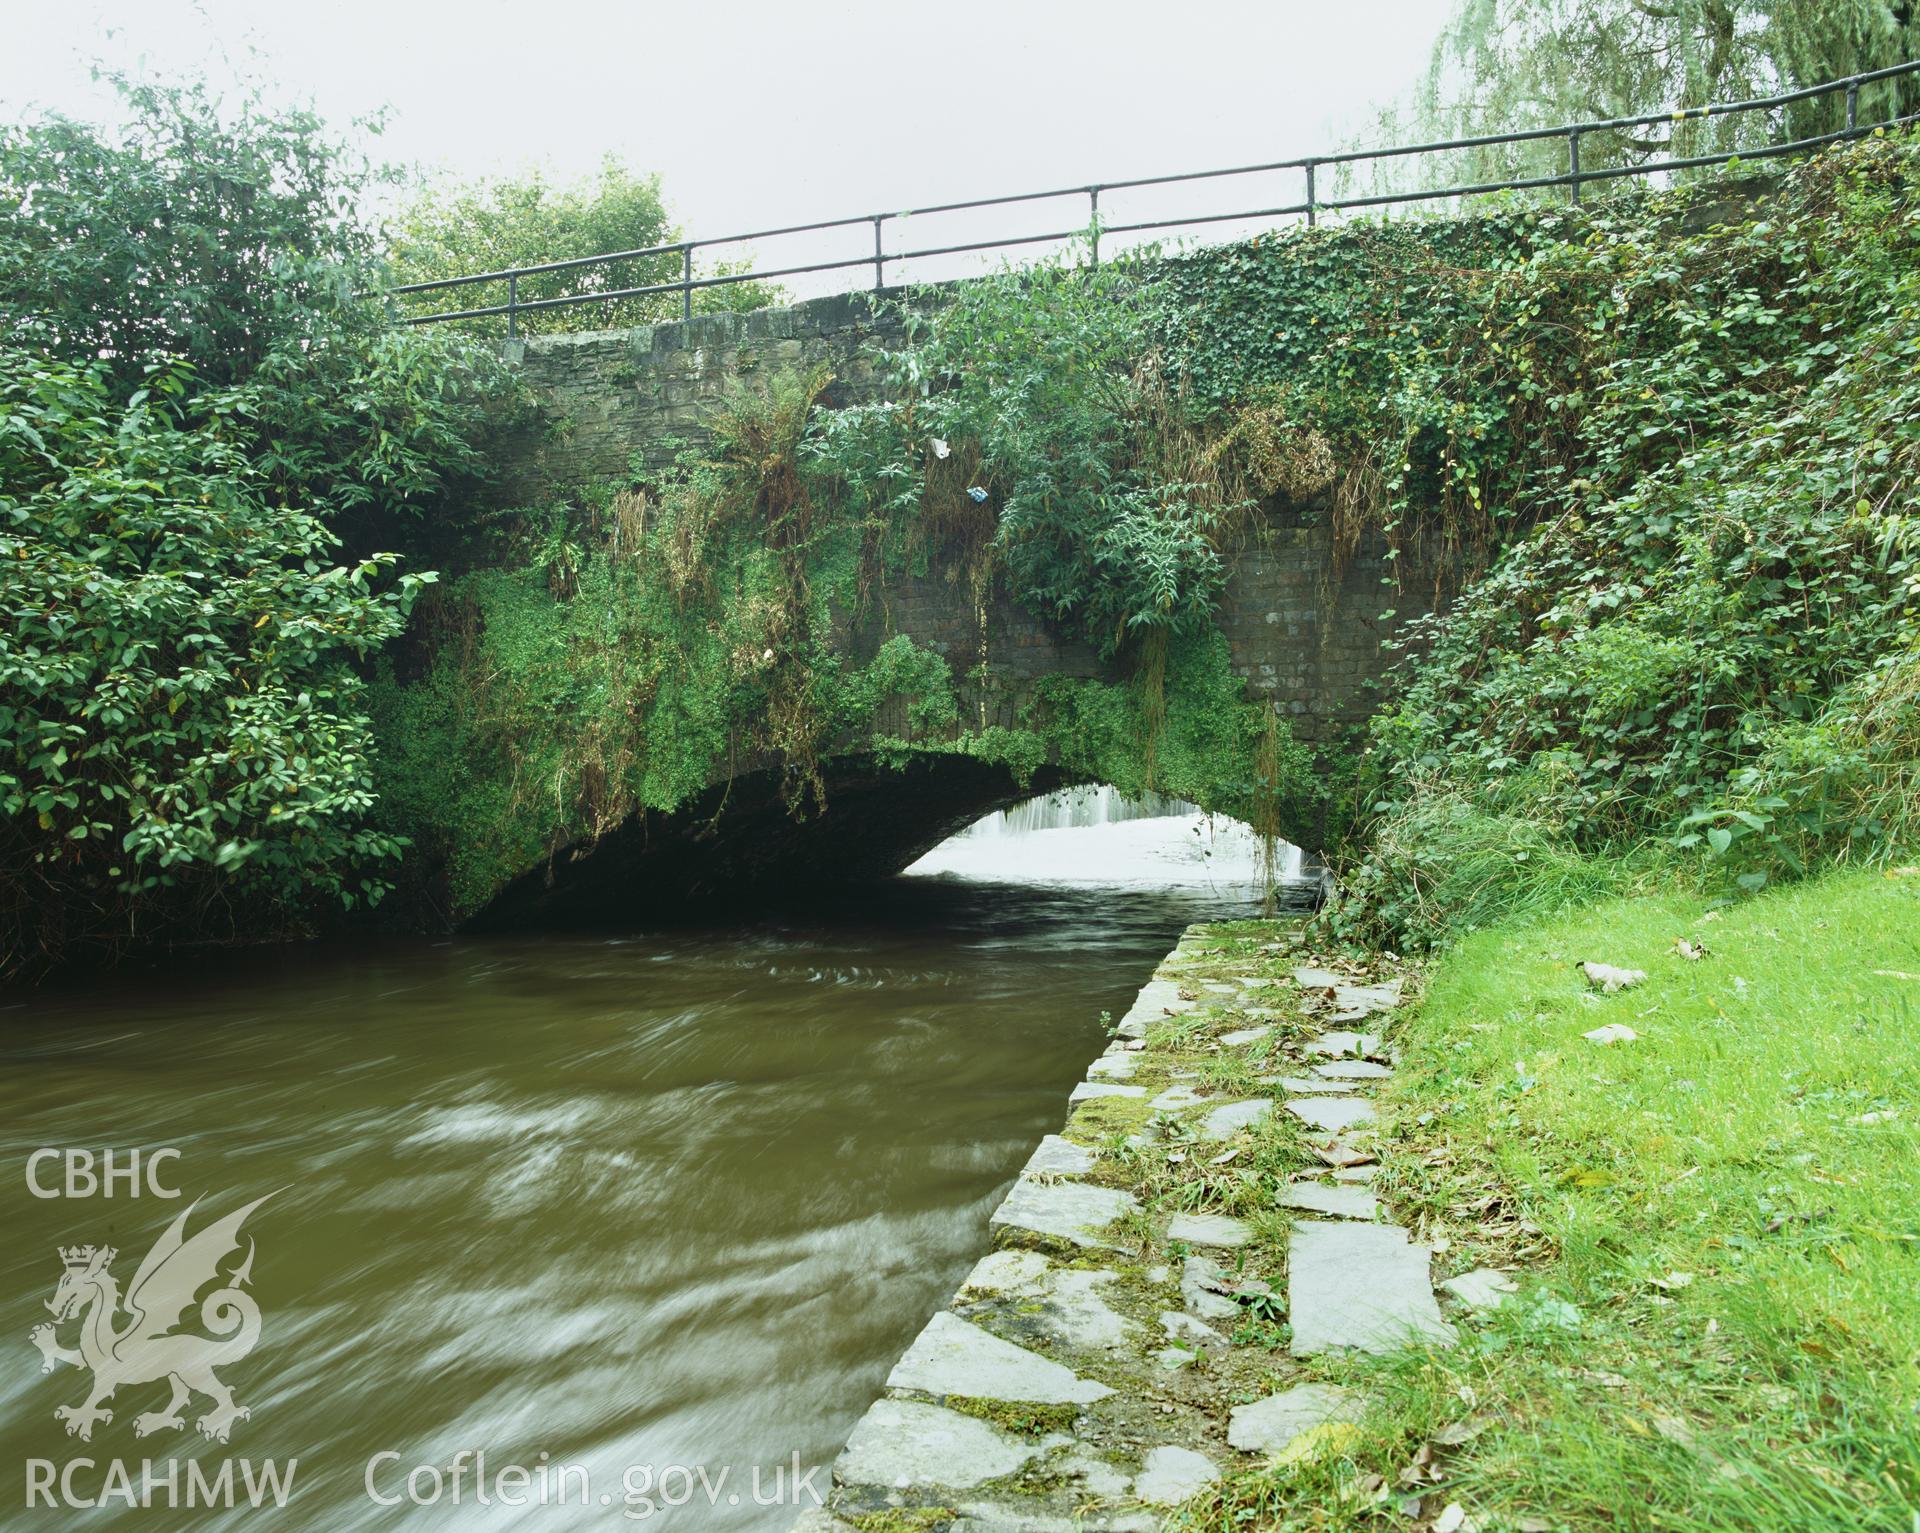 Colour transparency showing  Upper Clydach Aqueduct, Swansea Canal, produced by Iain Wright, October 2005.